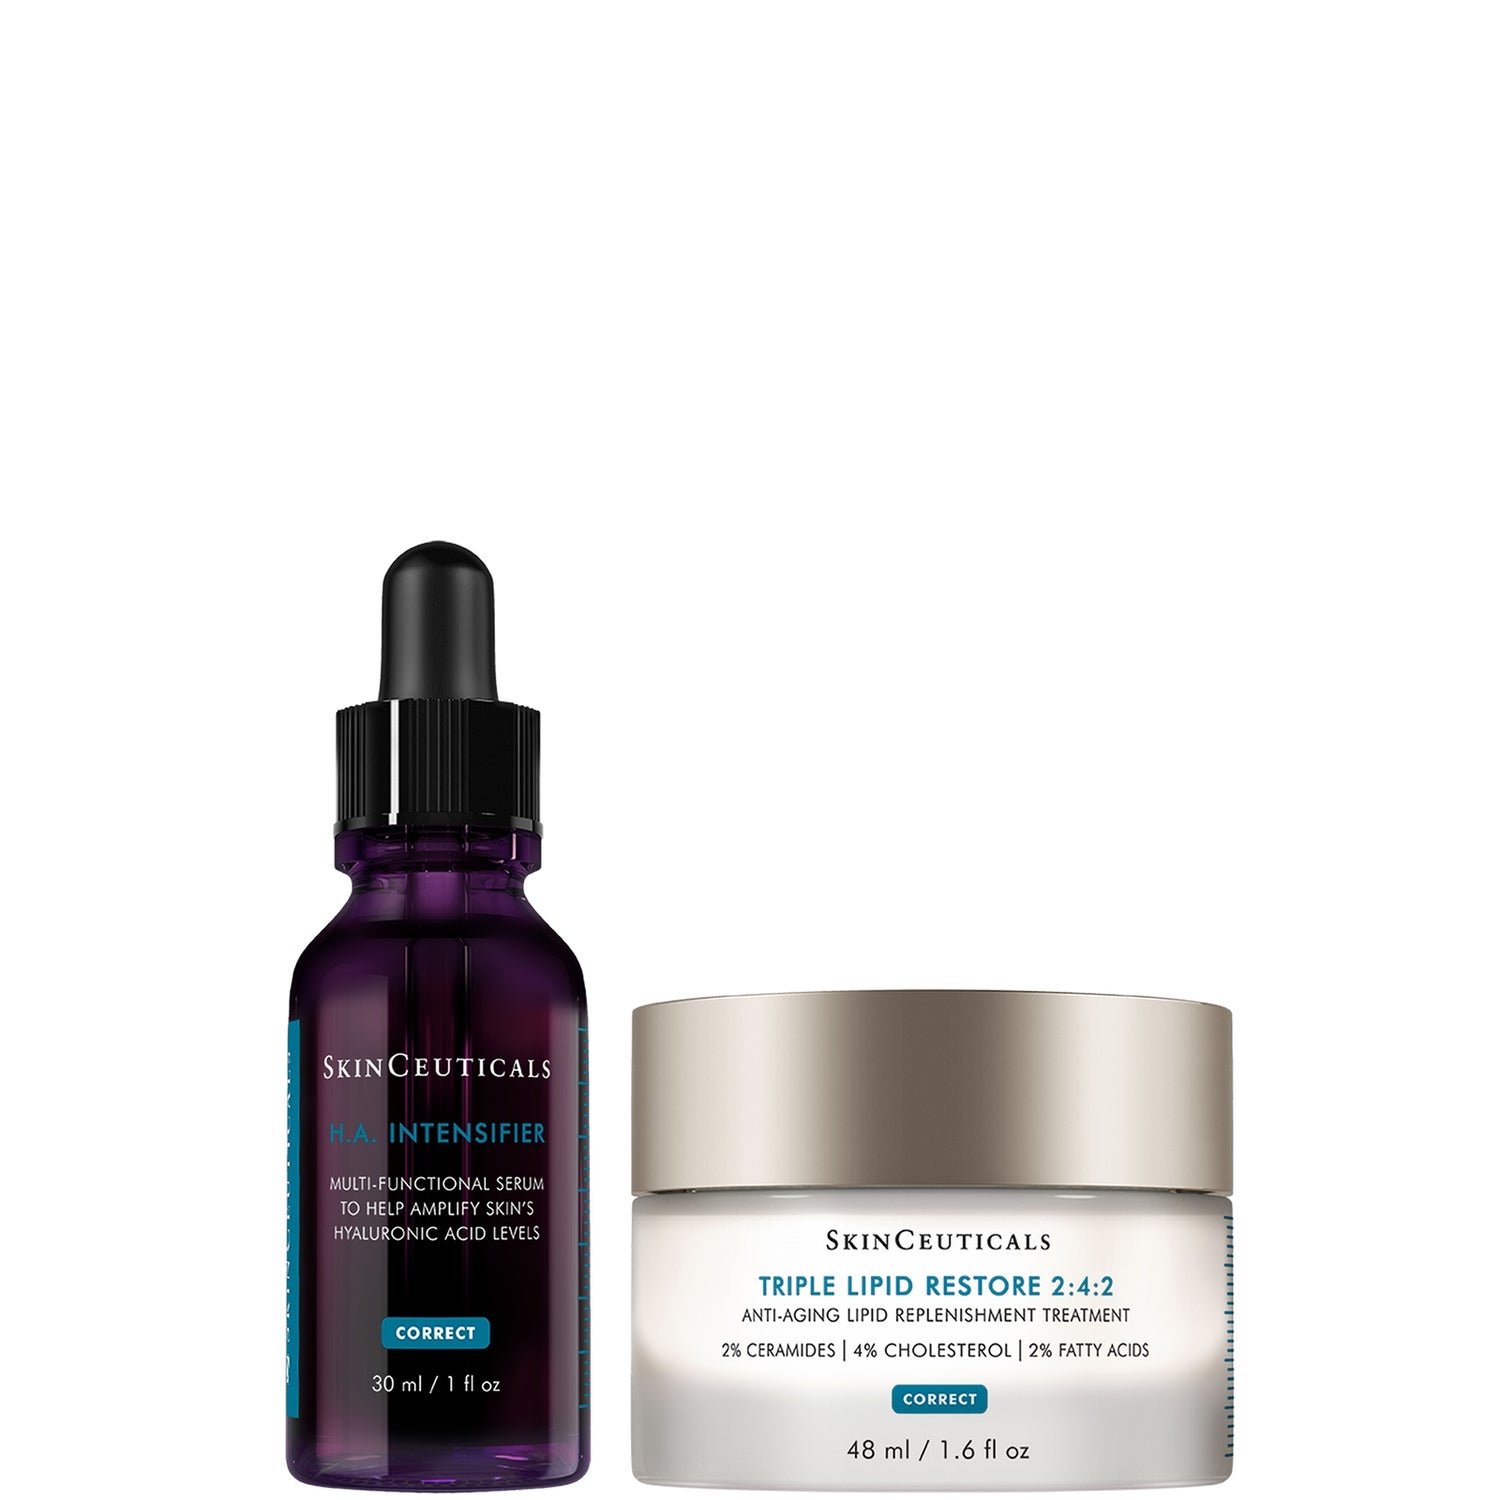 SkinCeuticals Anti-Aging Regimen with Triple Lipid Restore 2:4:2 and Hyaluronic Acid